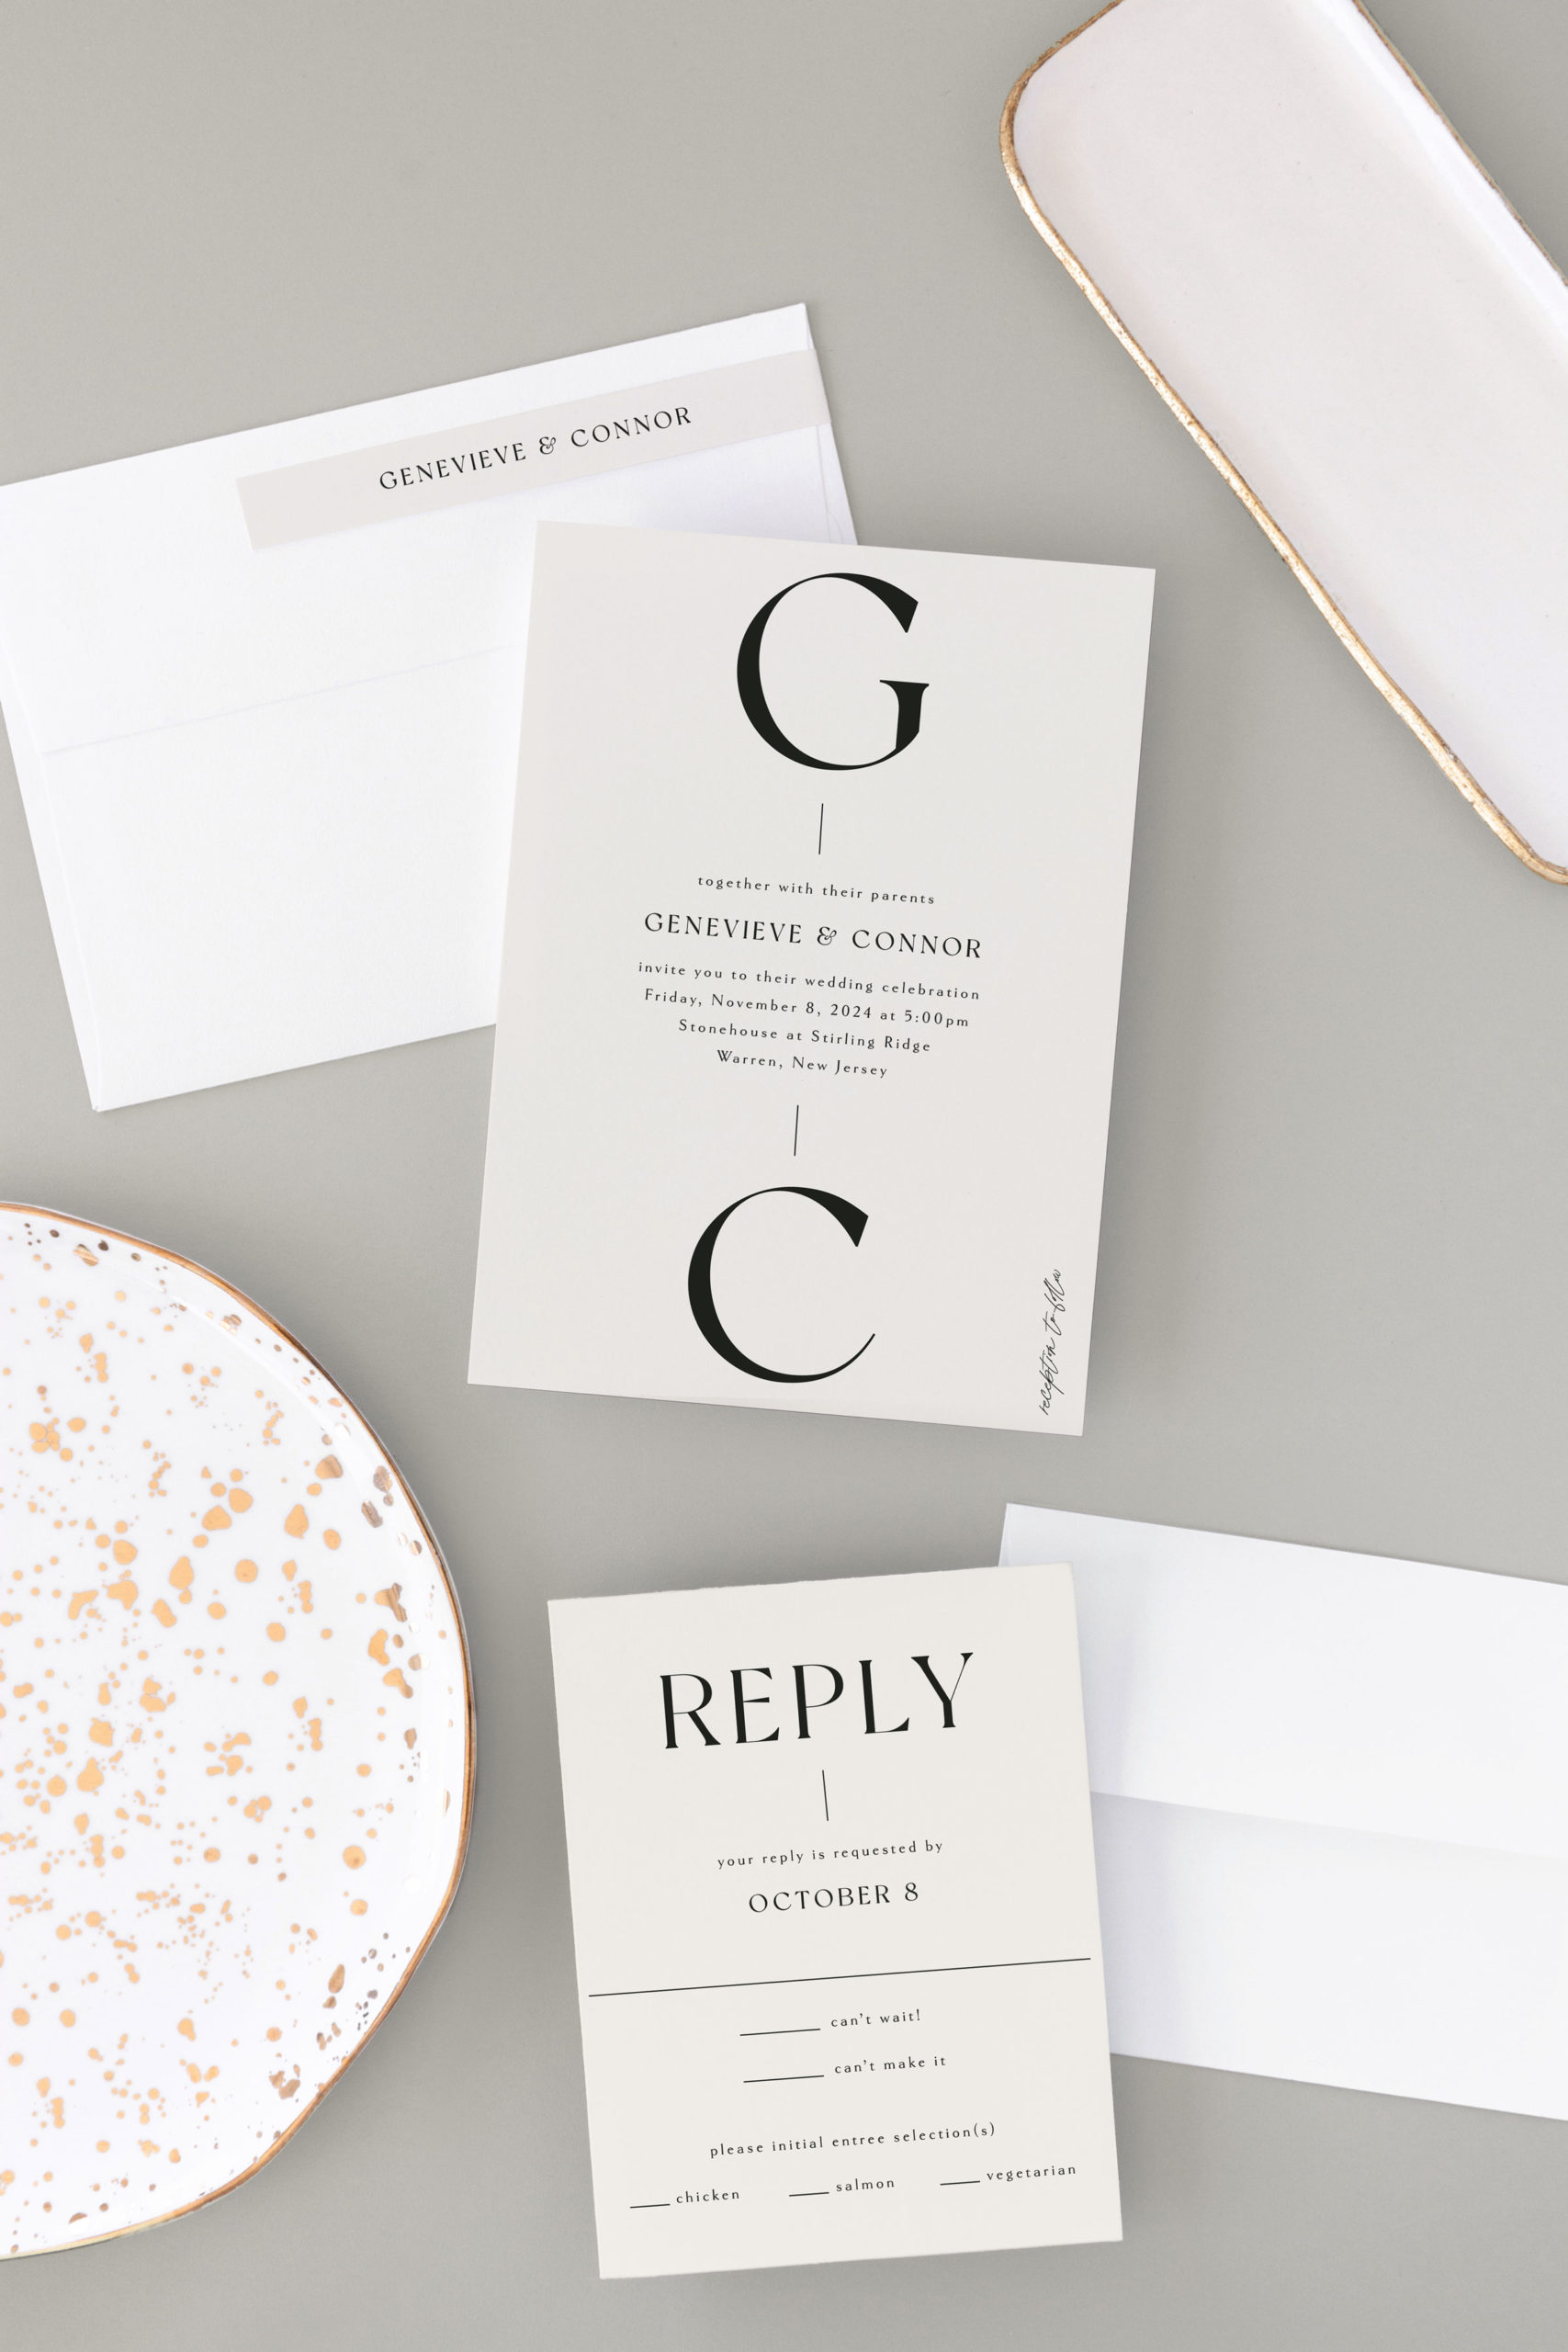 A modern wedding invitation with bold initials, designed for Minted.